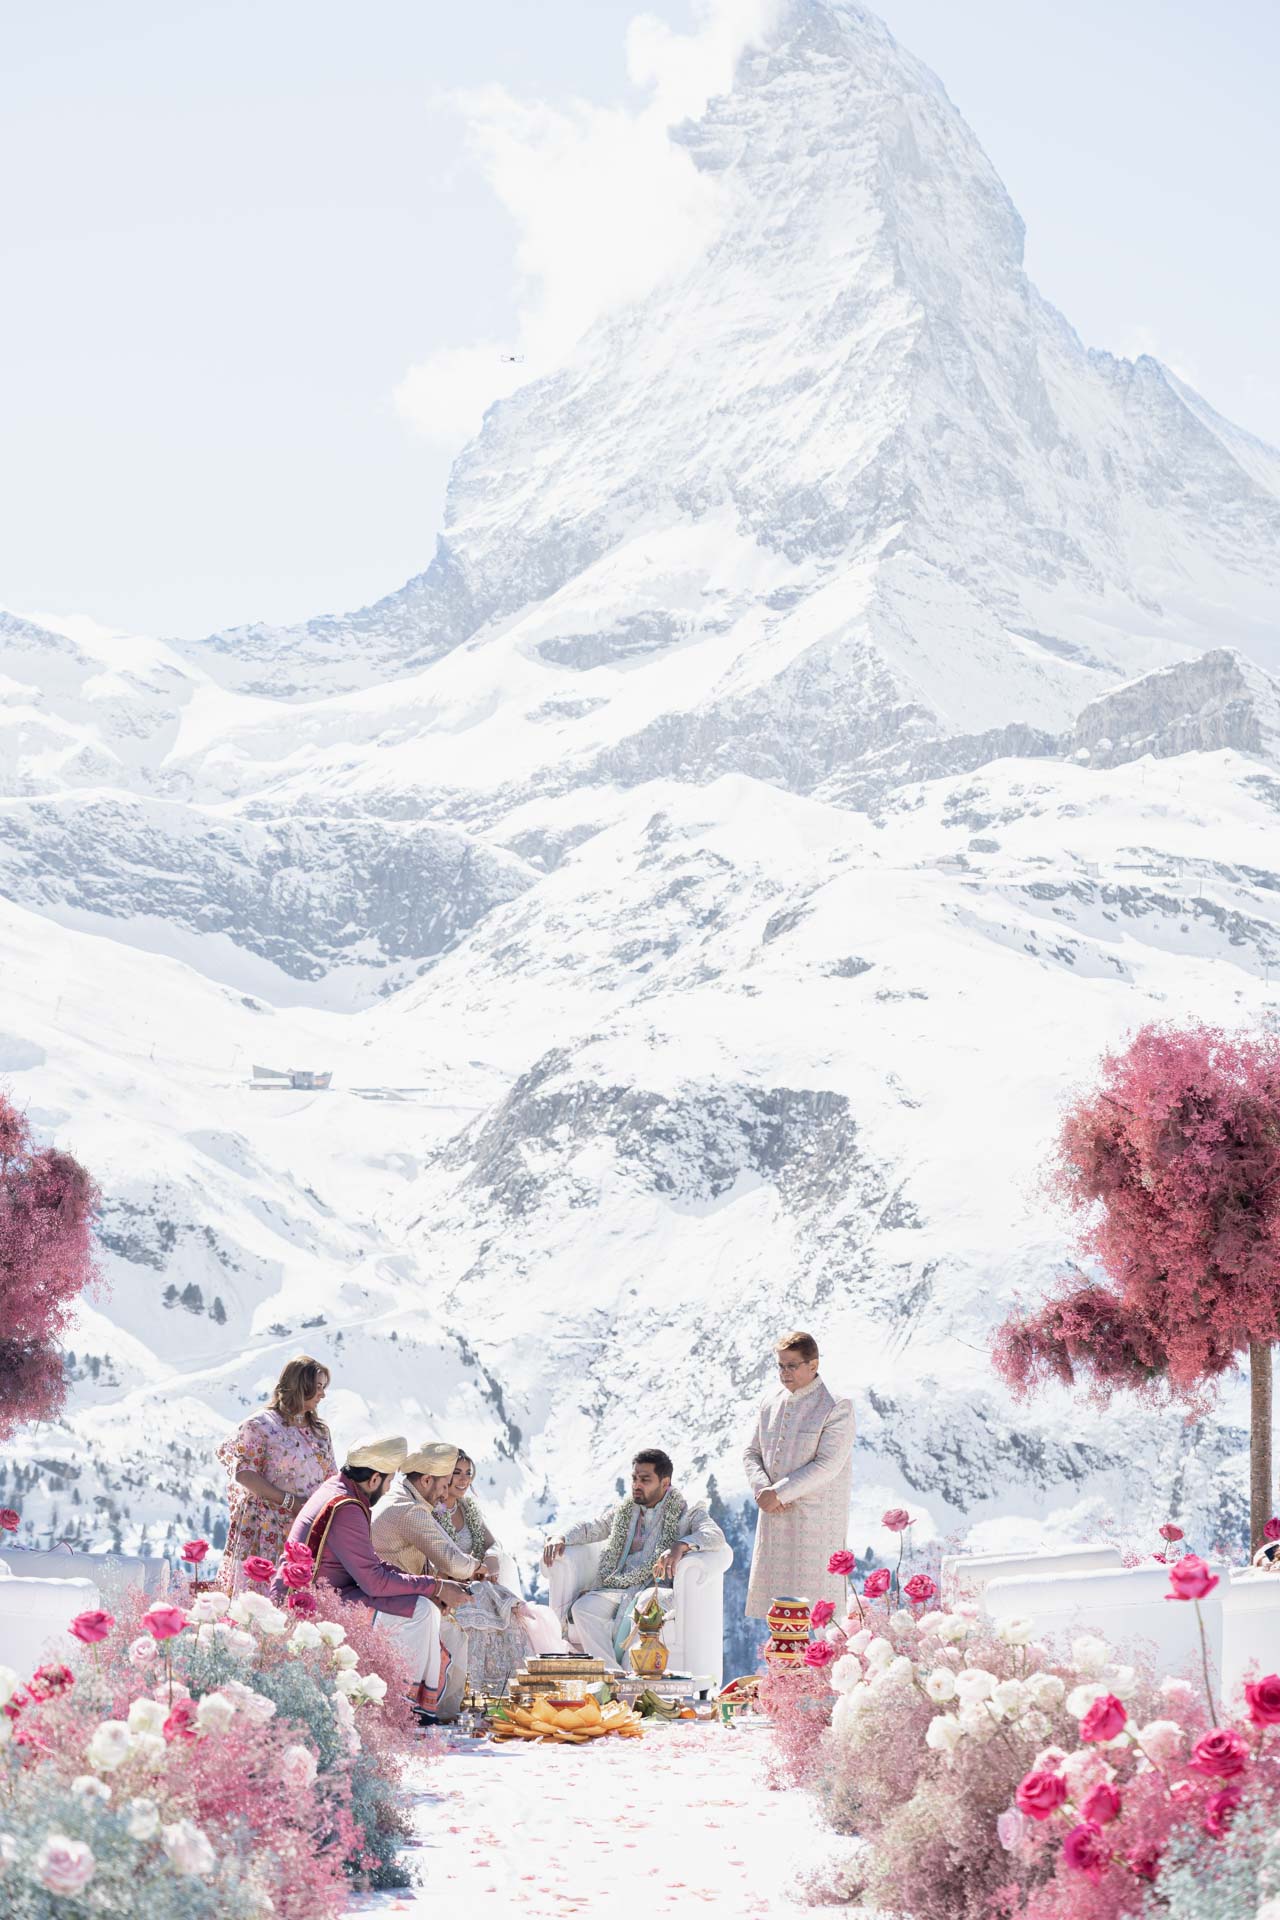 A wedding on the slopes of Matterhorn mountain, between the white of snow and the colors of India :: 37